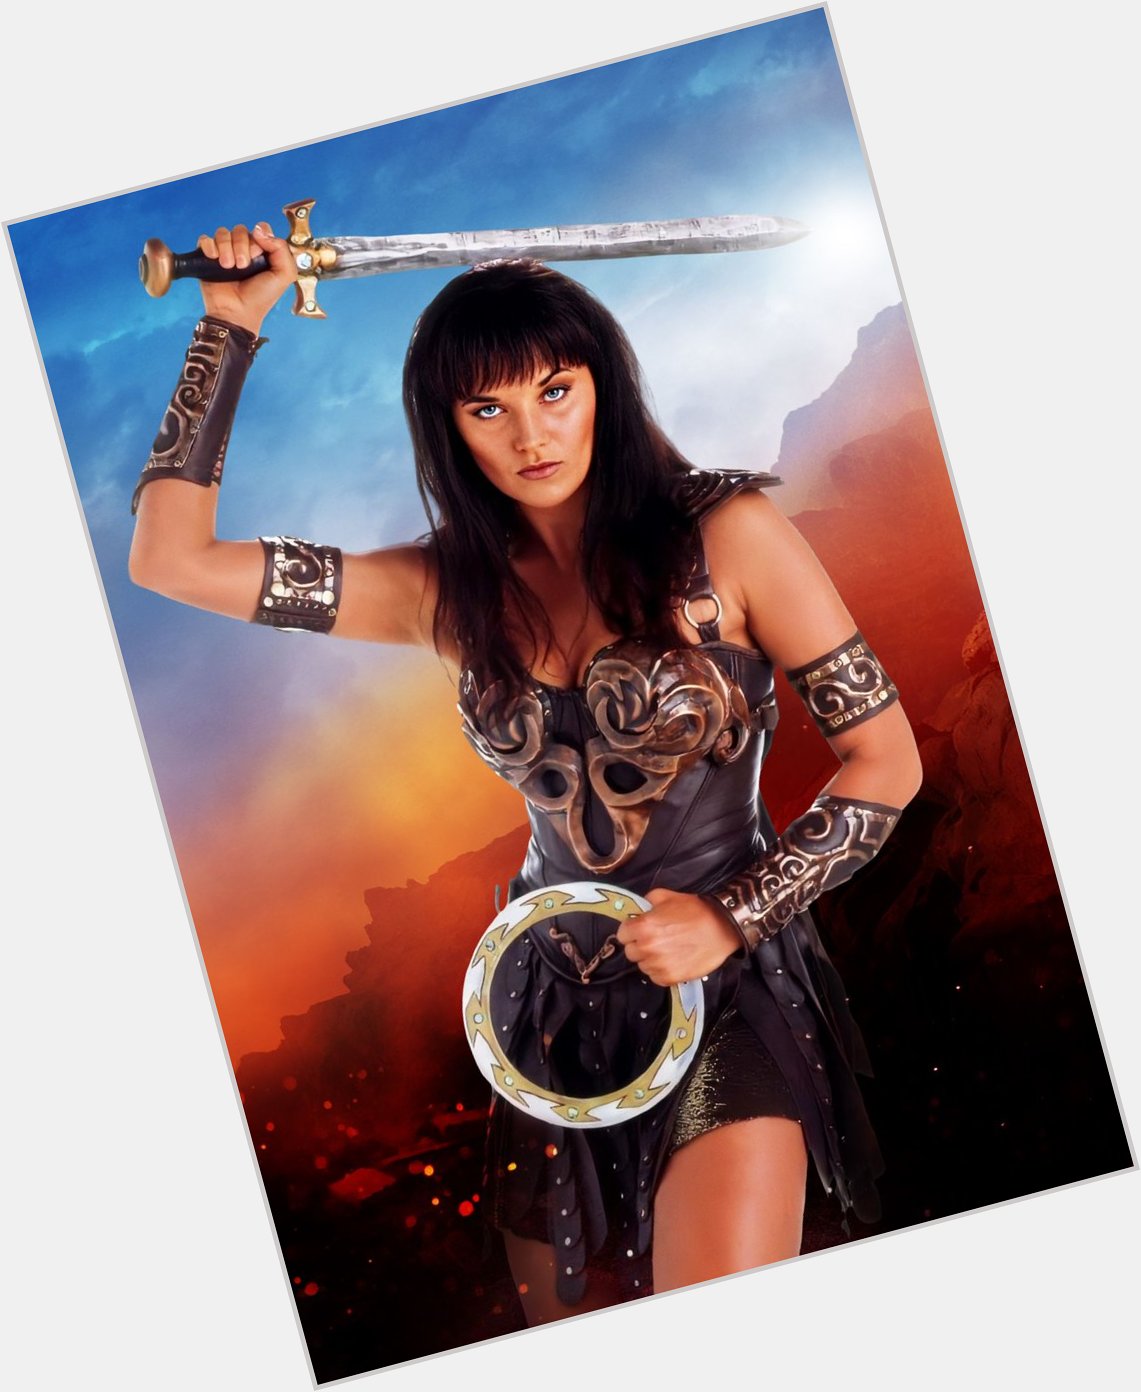 Happy Birthday to  Actress - Lucy Lawless Who is 54yo today!
(1995 playing Xena - below) 